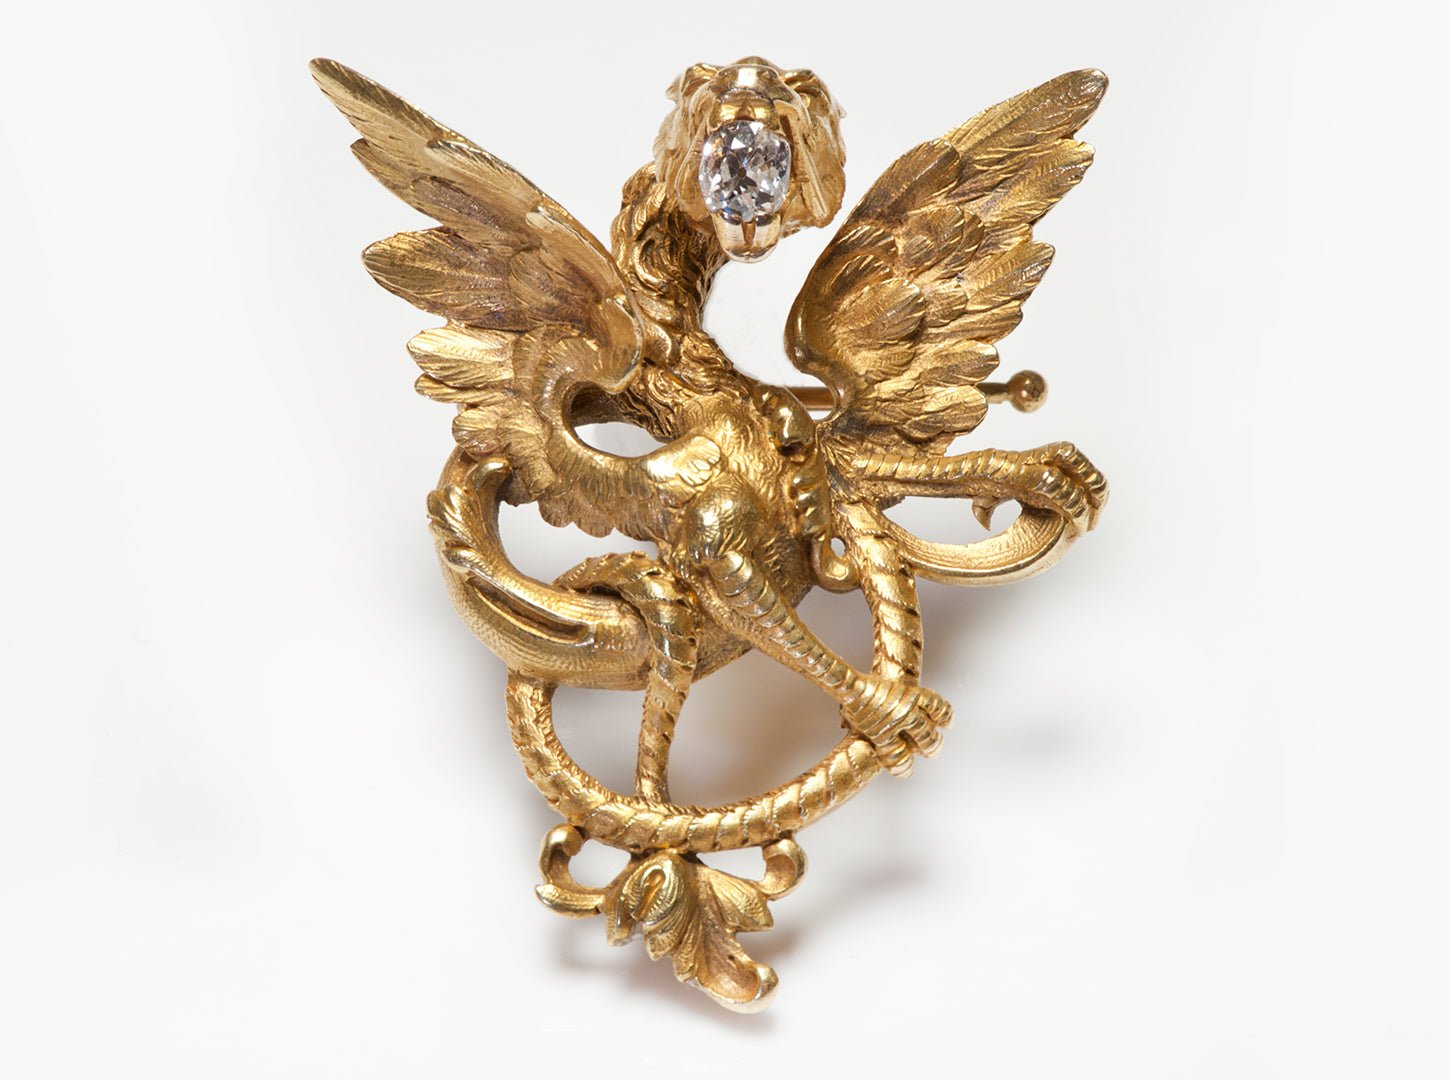 Antique Art Nouveau Jewelry – Classy and Glamorous - DSF Antique Jewelry